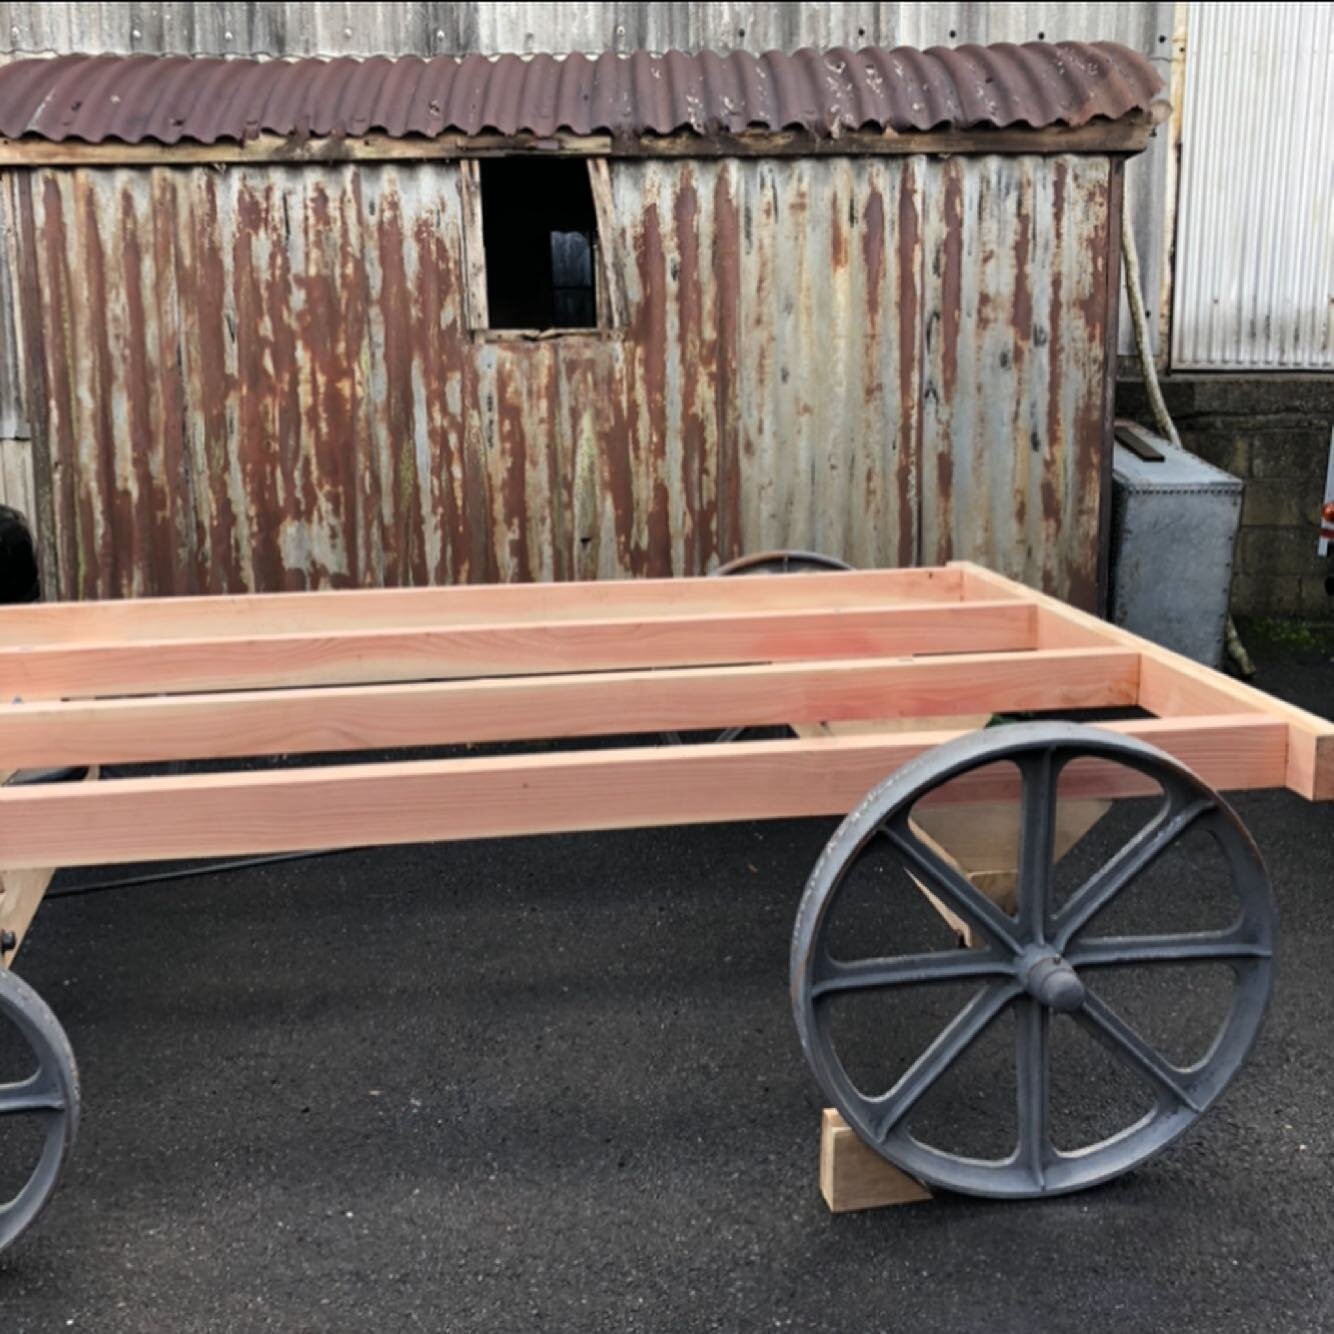 With spring and summer well on its way, why not take the opportunity to build yourself a garden retreat or home office?
We&rsquo;ll supply the foundations for you as a rolling chassis.
Made by hand in our workshop using storm fallen Oak and Douglas f